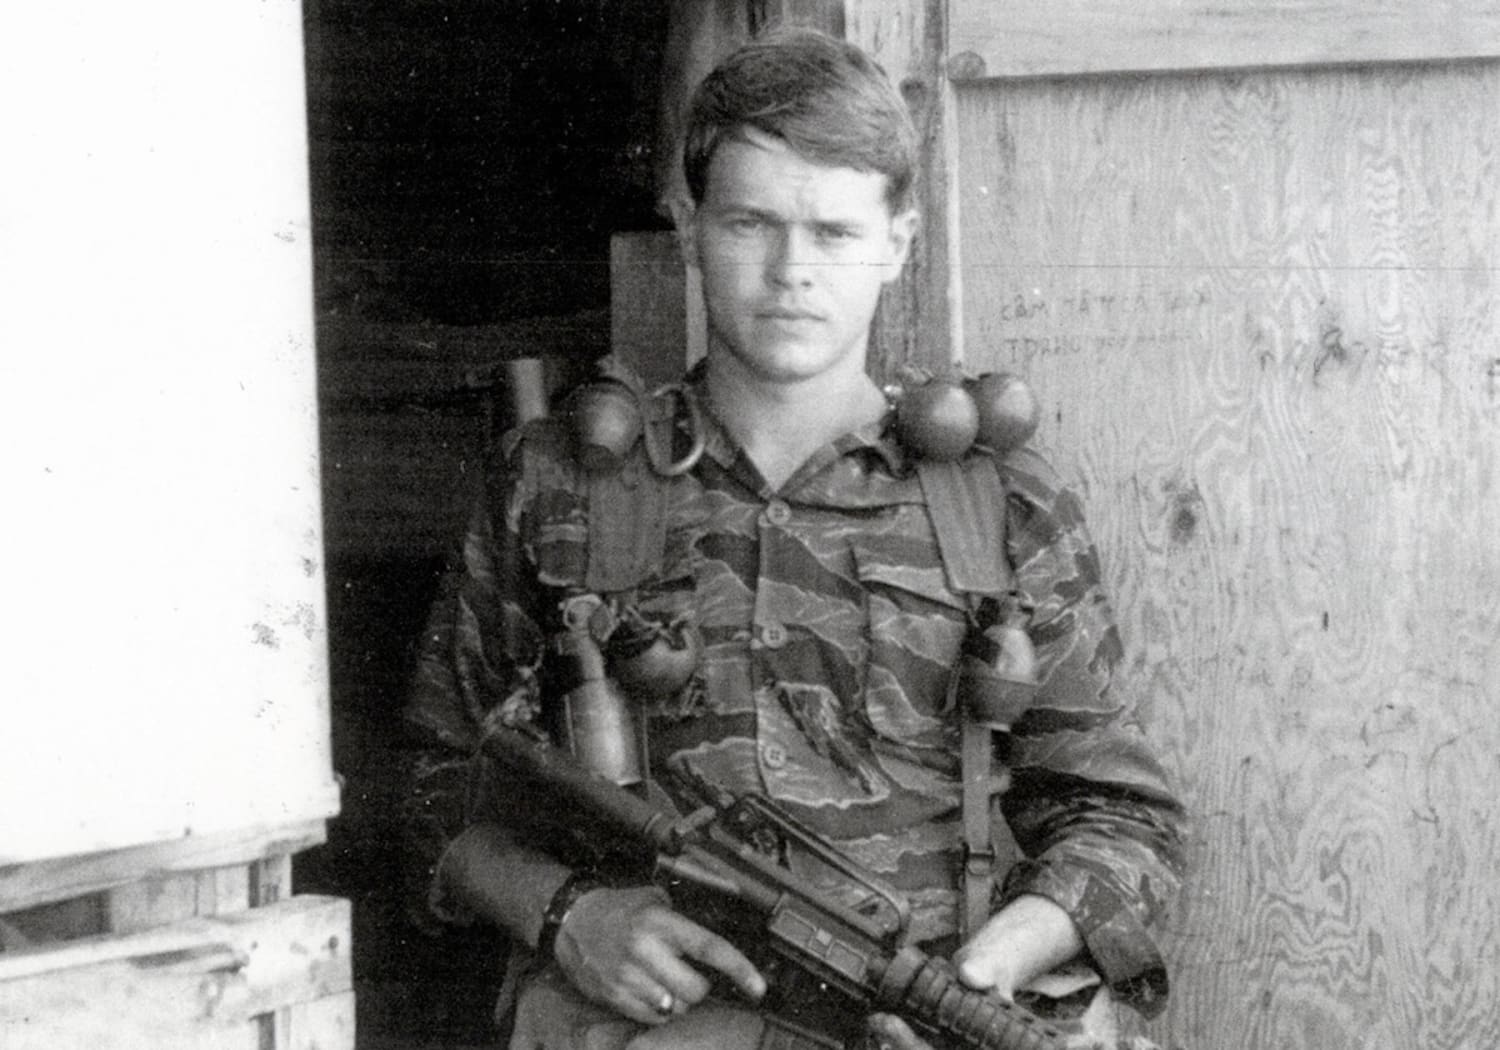 MACV-SOG Team Leader John Stryker Meyer while clutching a CAR-15. SOG conducted Top Secret cross-border operations into Cambodia & Laos to obstruct the Ho-Chi-Minh supply route(s). Vietnam, 1968